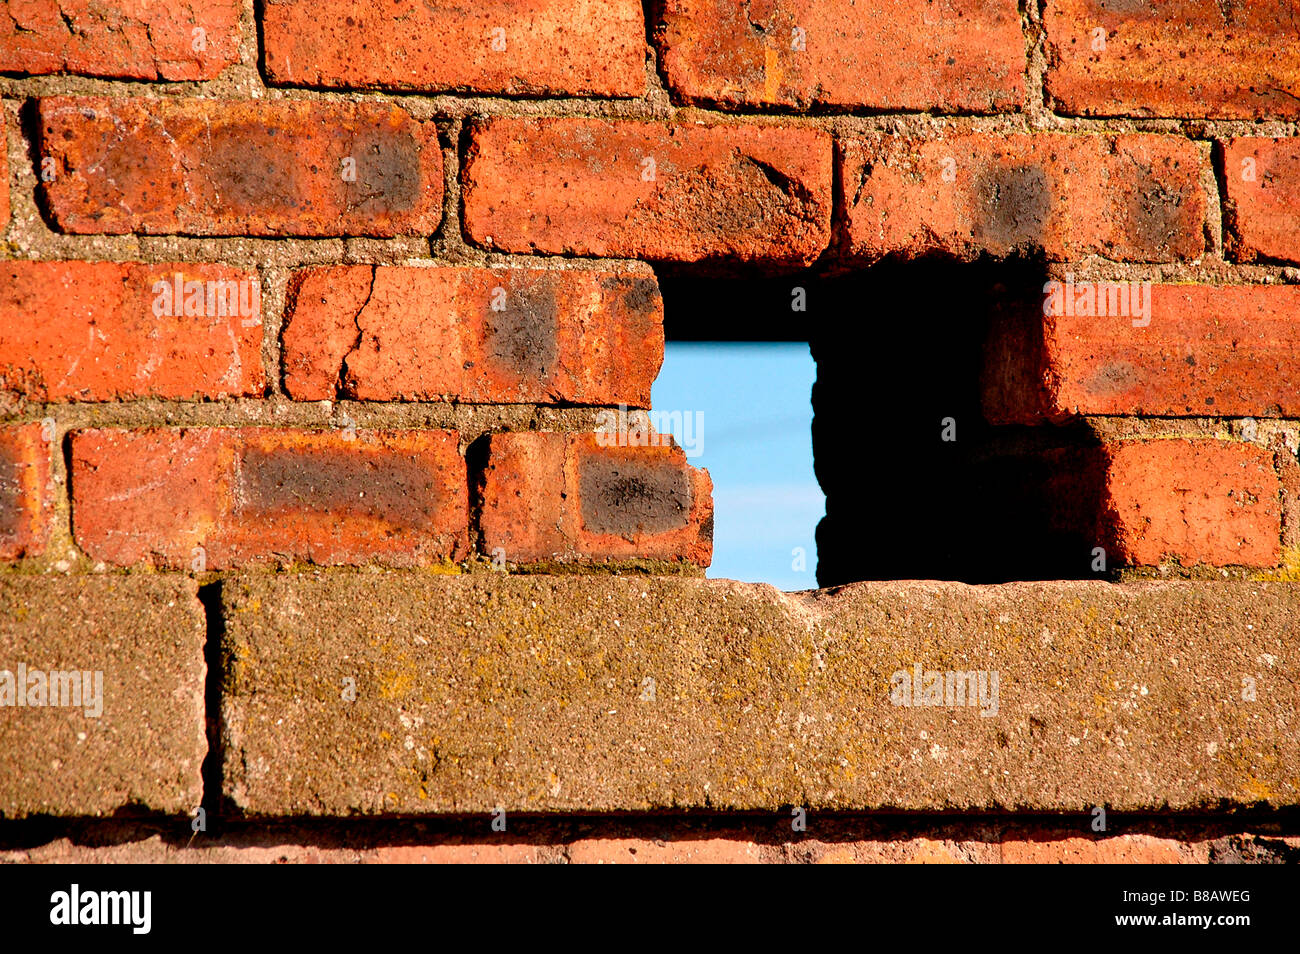 A hole in a brick wall. Stock Photo